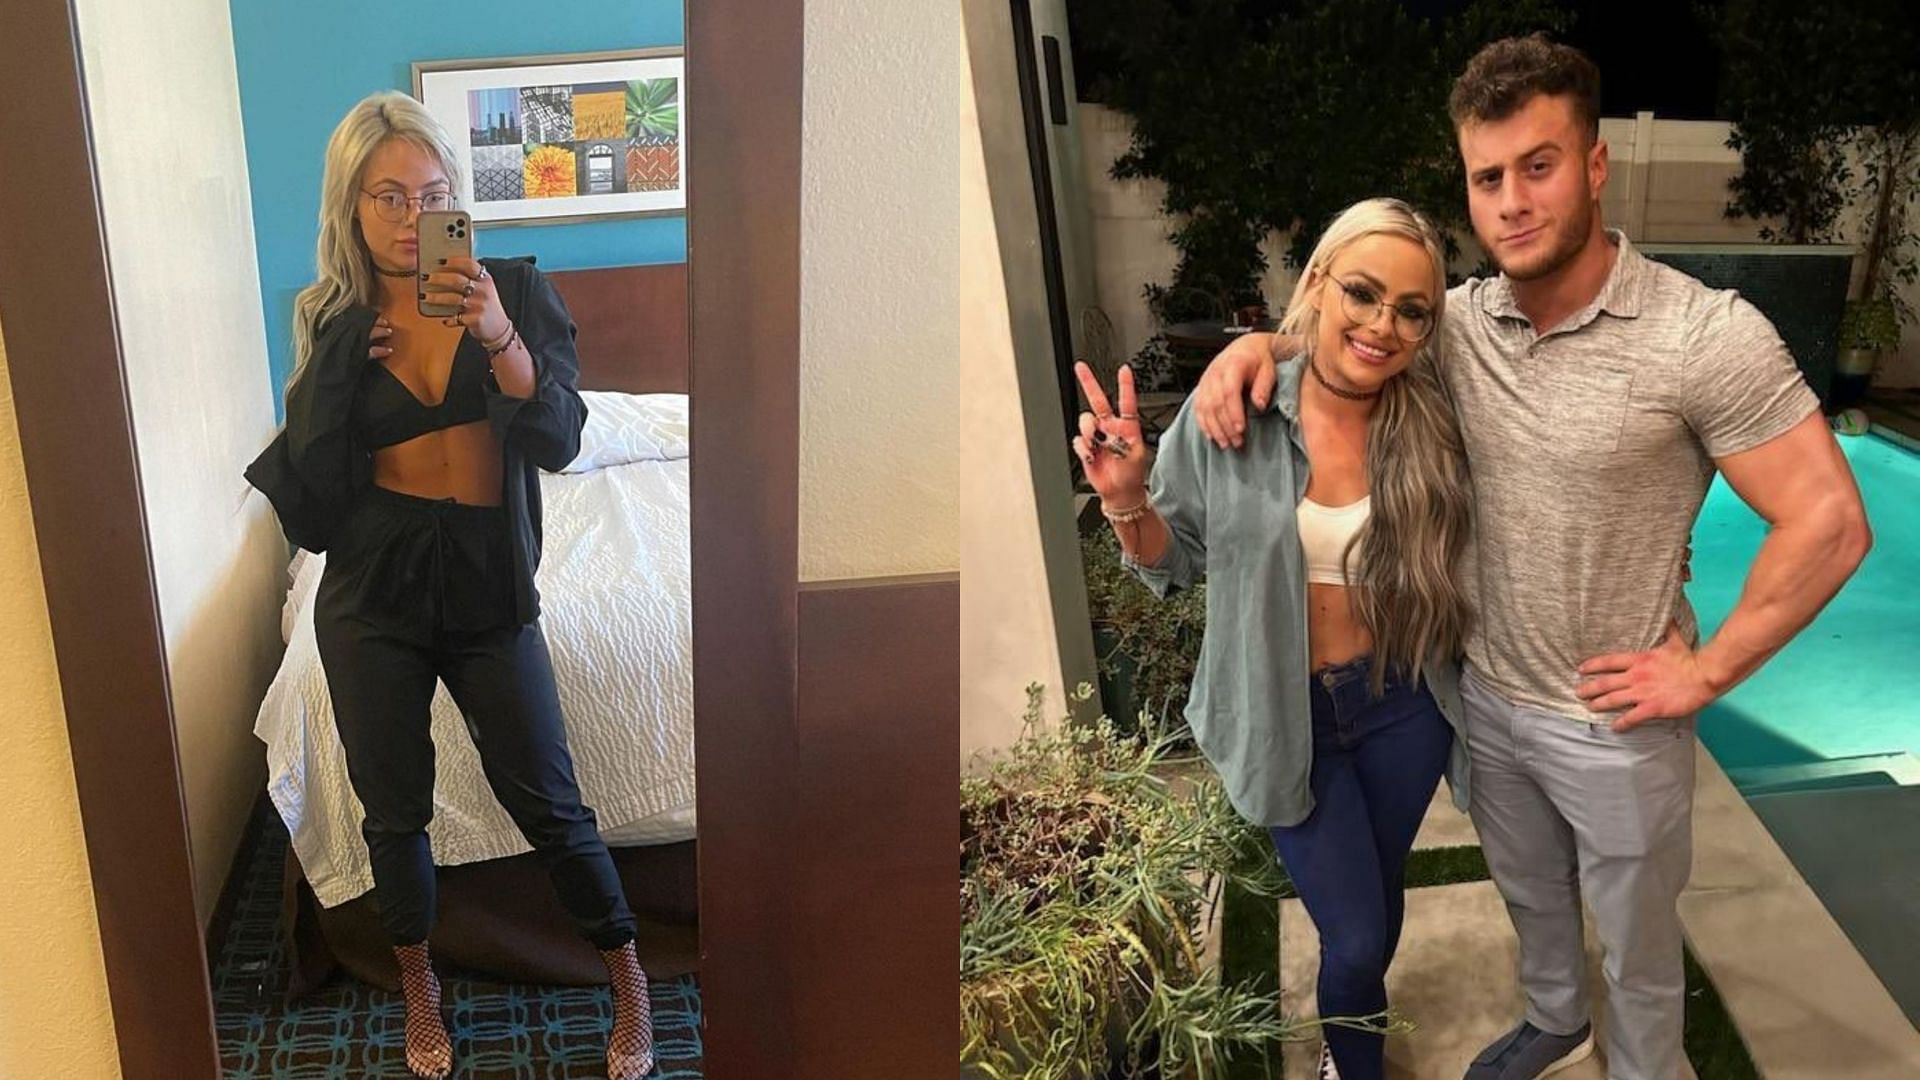 A few wrestlers have been rumored to date Liv Morgan in 2022